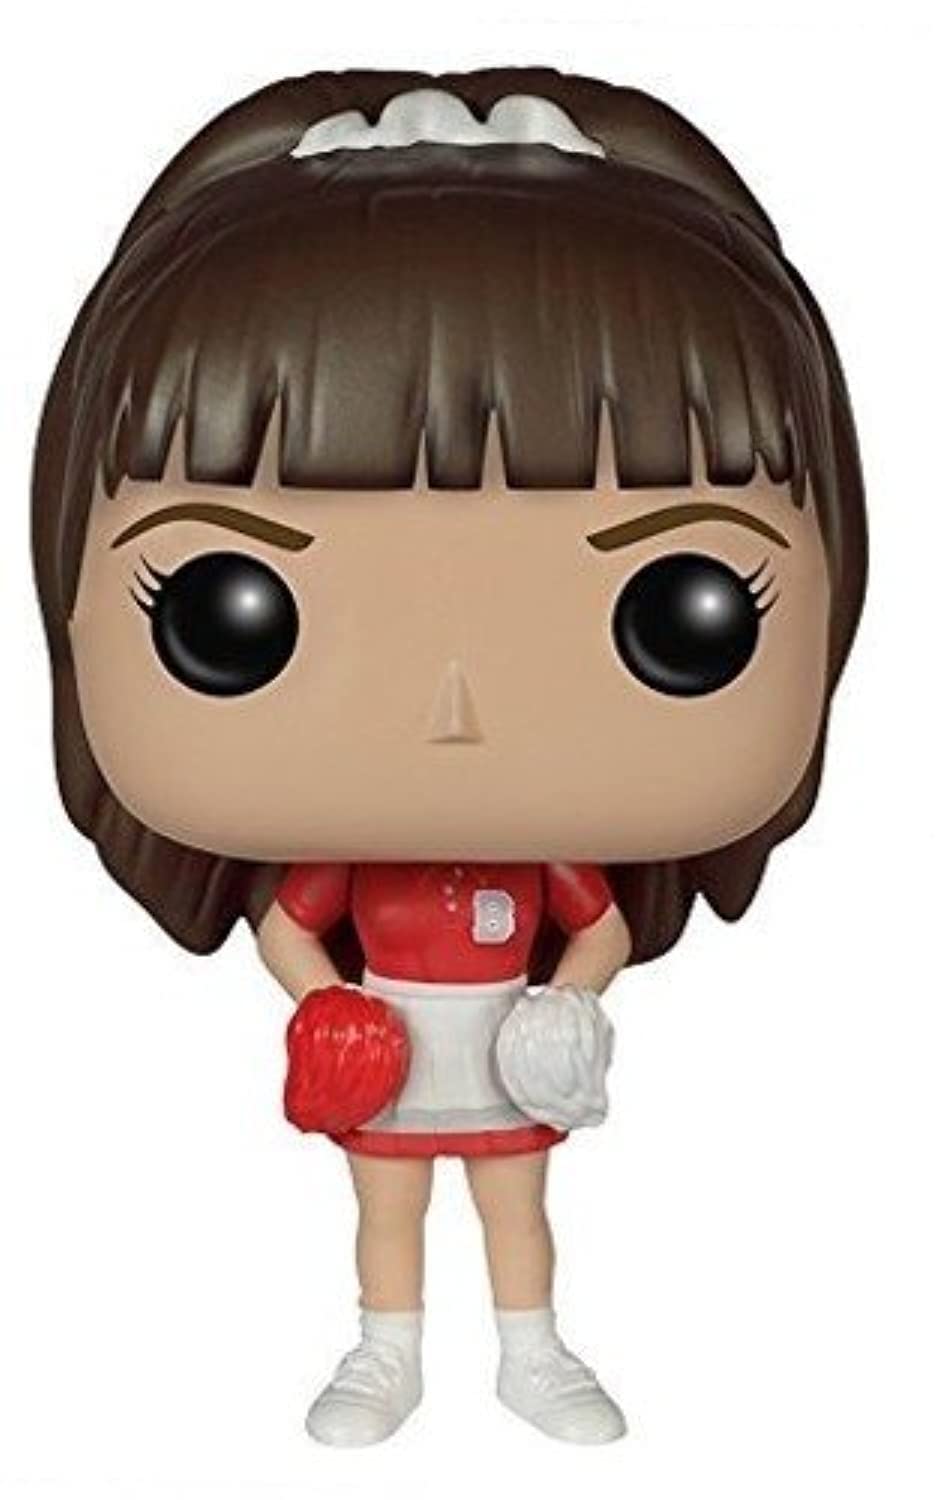 Funko POP! Television Saved by The Bell Kelly Kapowski Action Figure